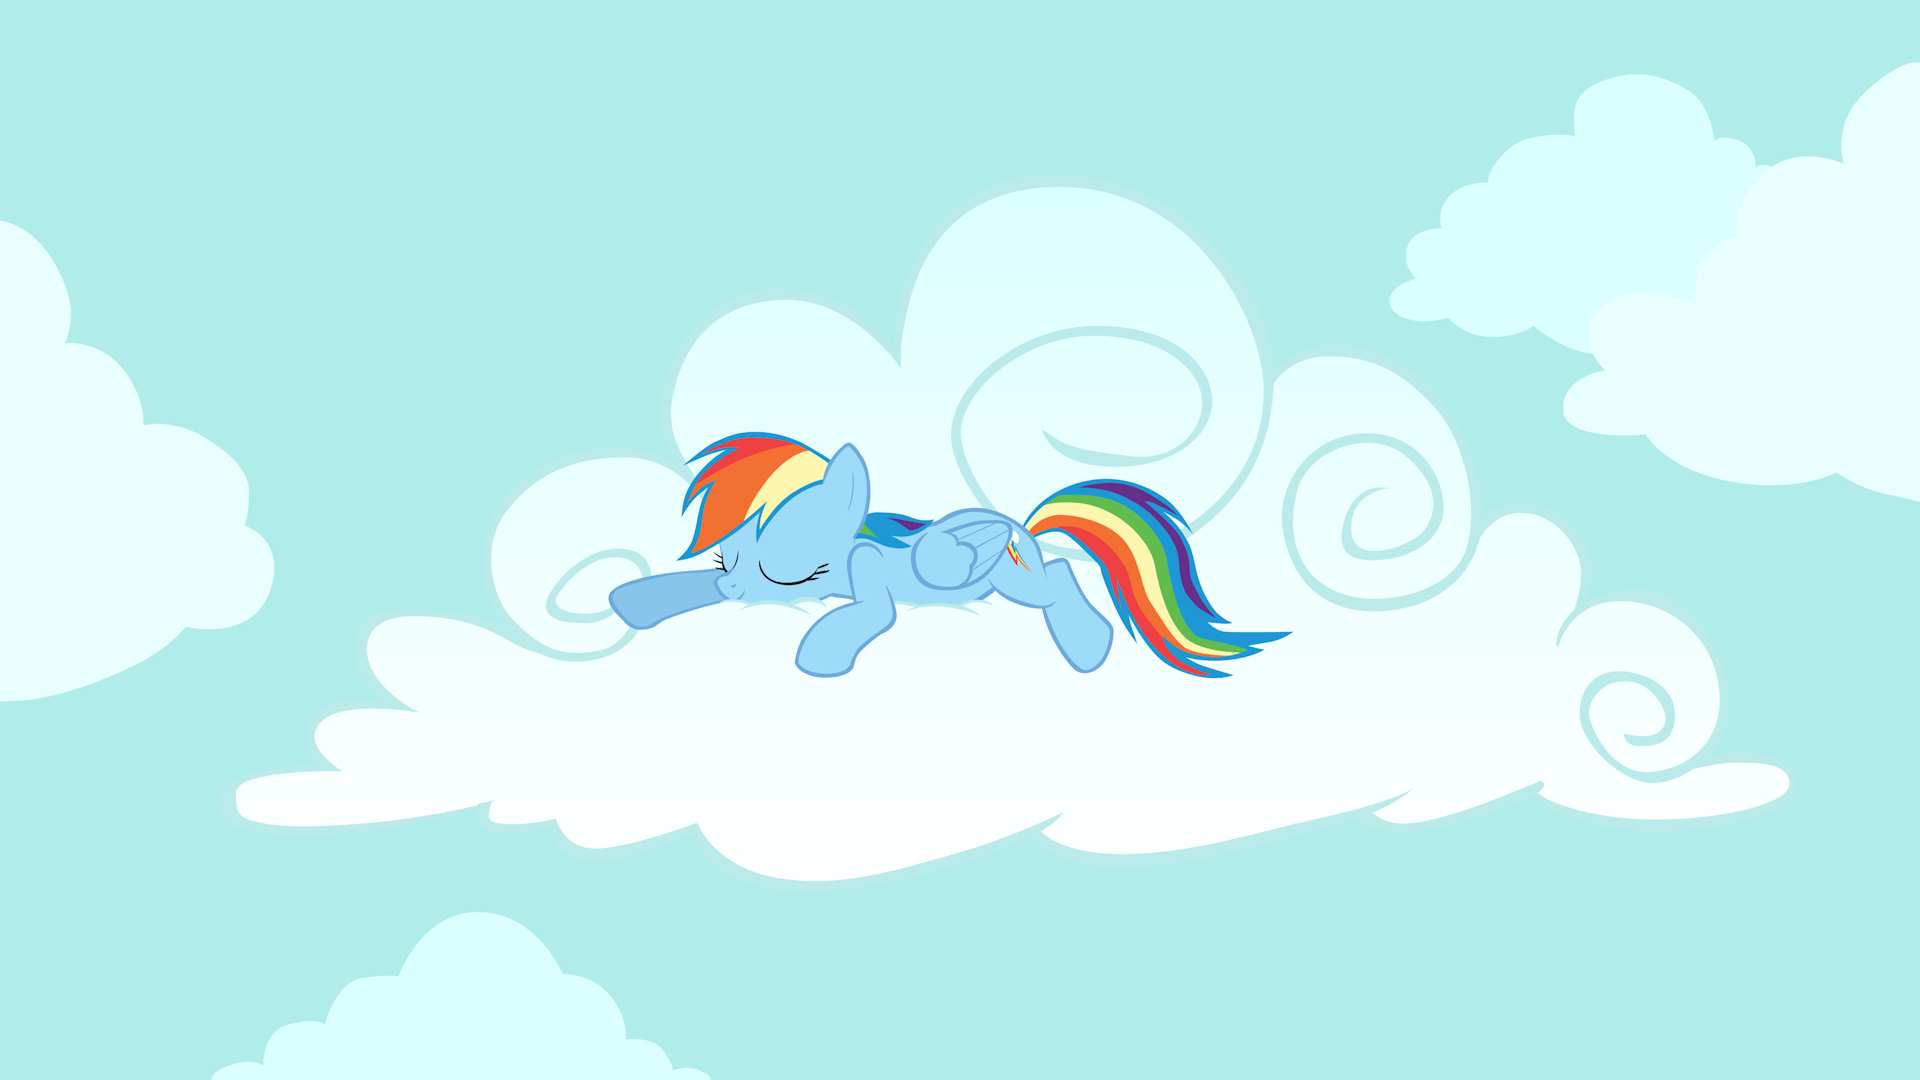 Dash is Busy... Napping by ShelltoonTV